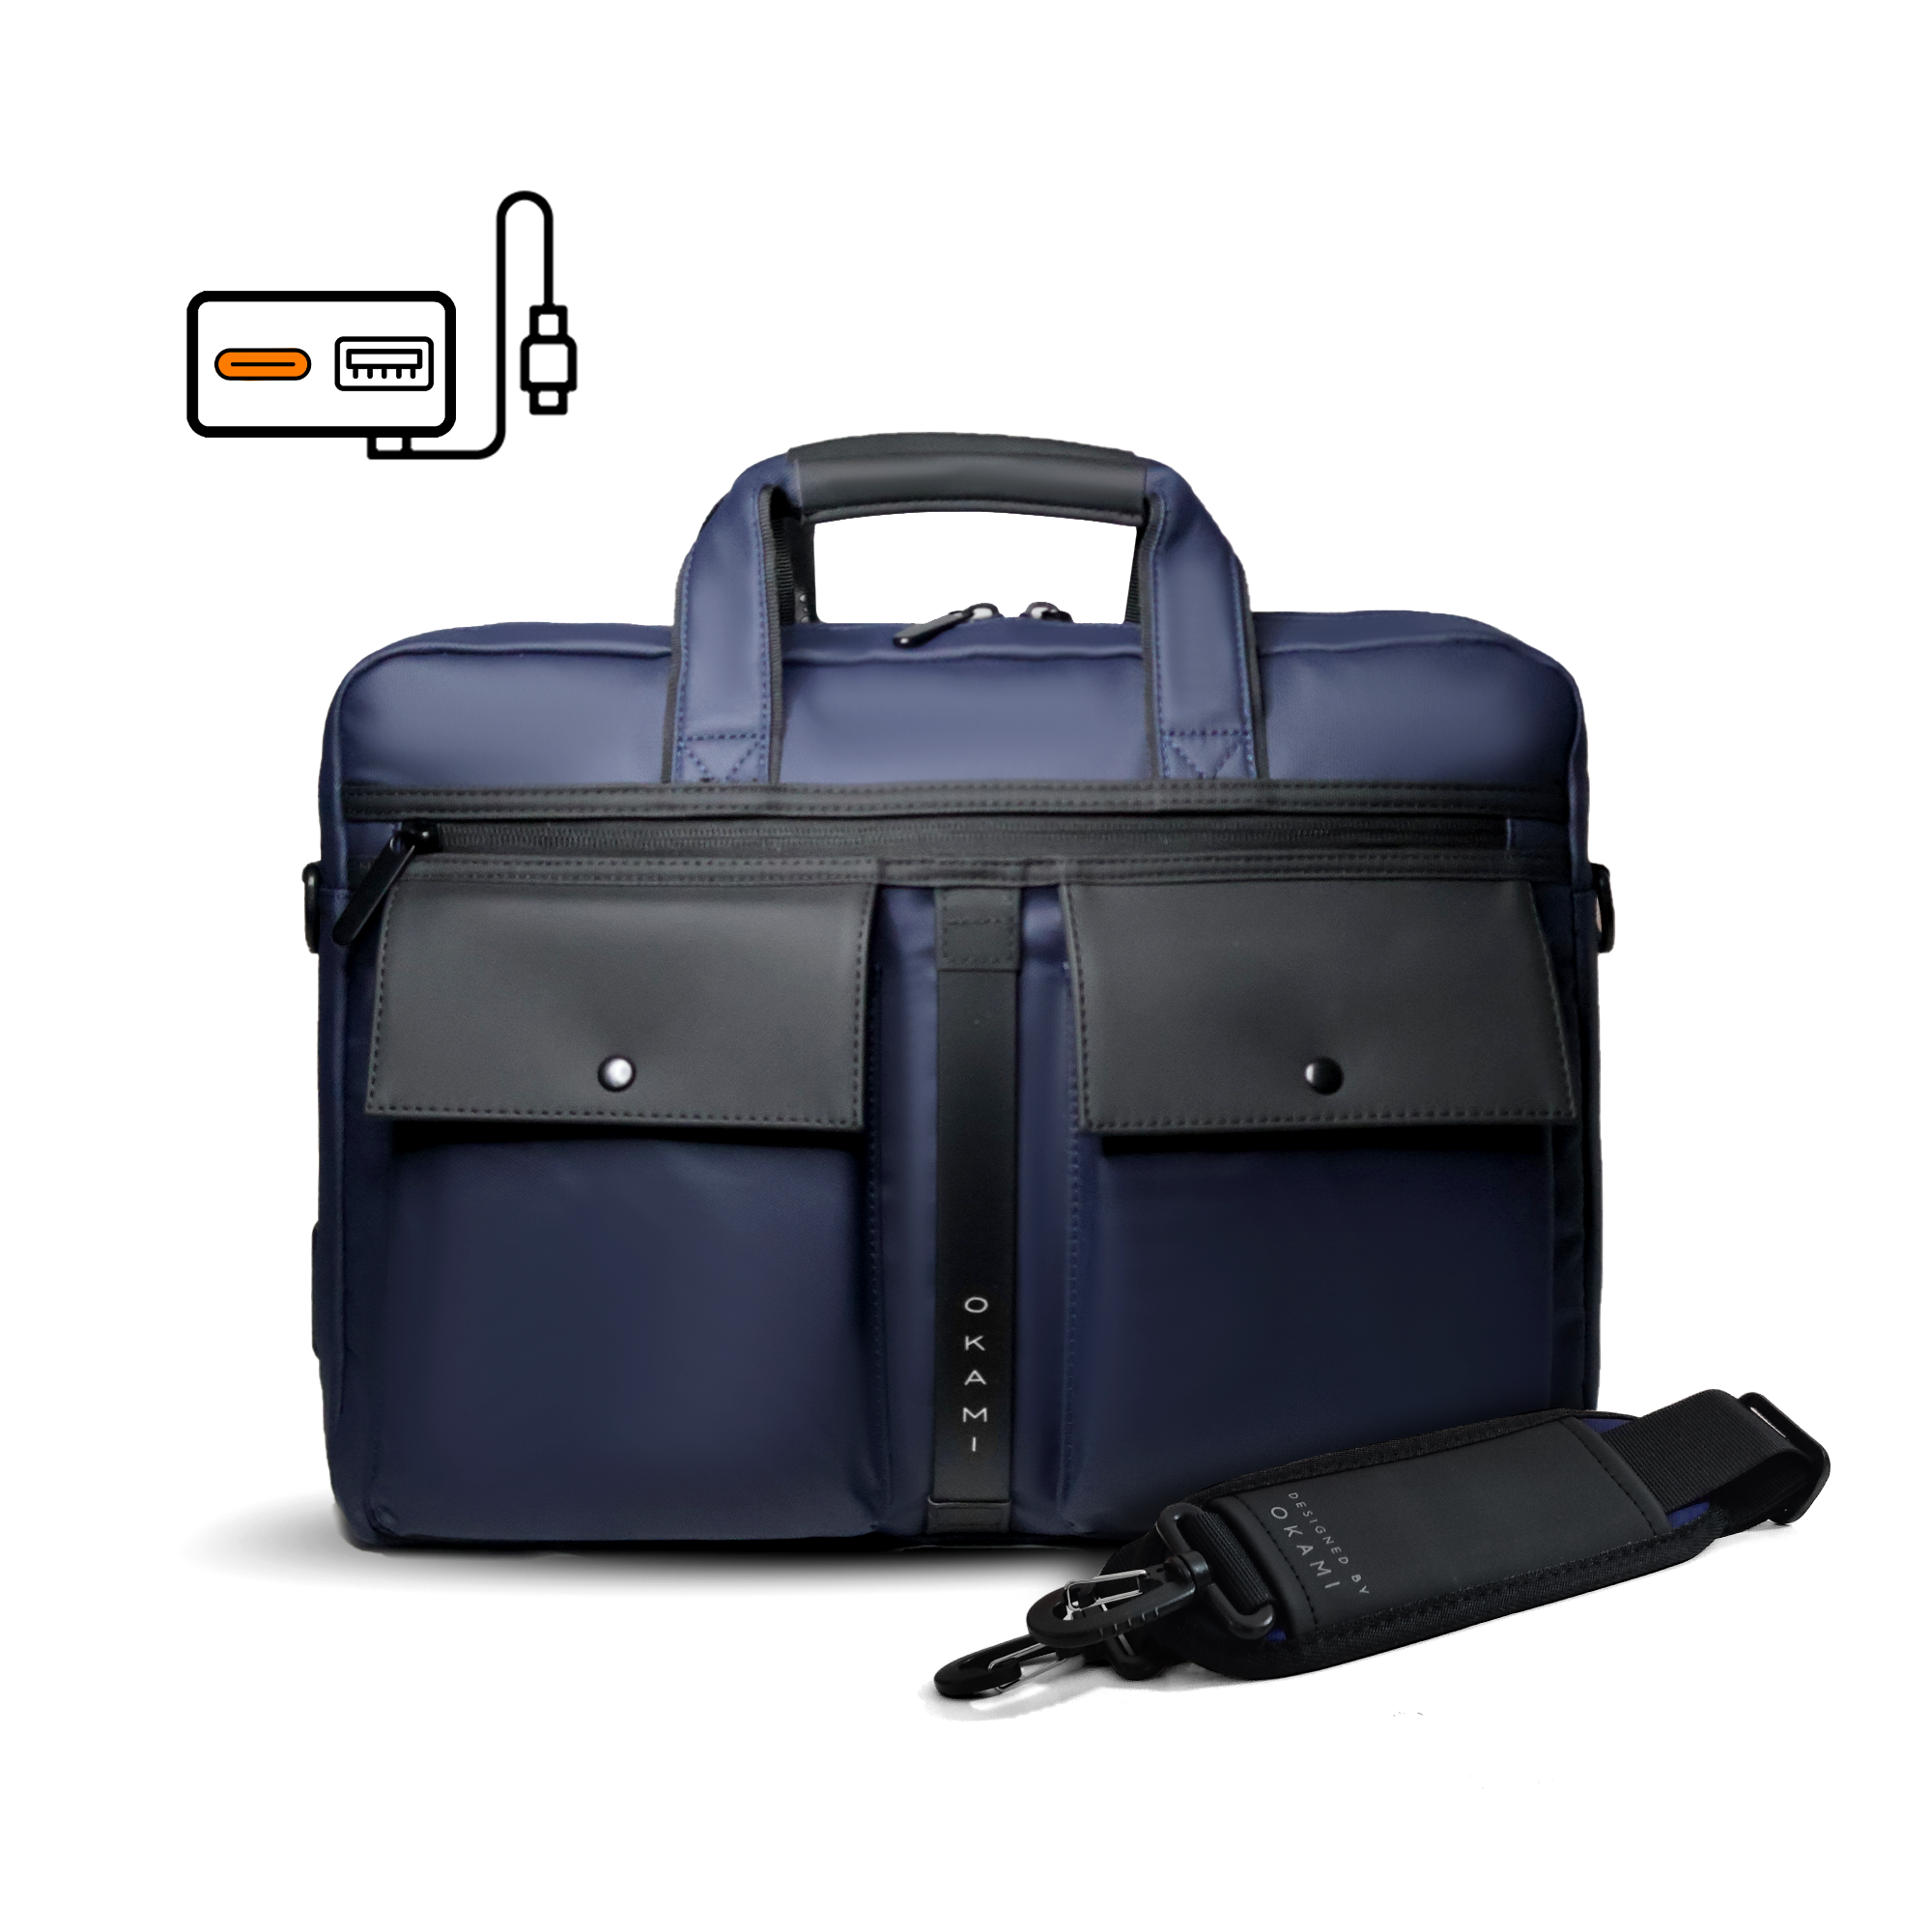 Zenpack Cargo Laptop Messenger Bag X Briefcase - DUAL USB with type-C port for Fast-Charging (Osaka Blue)